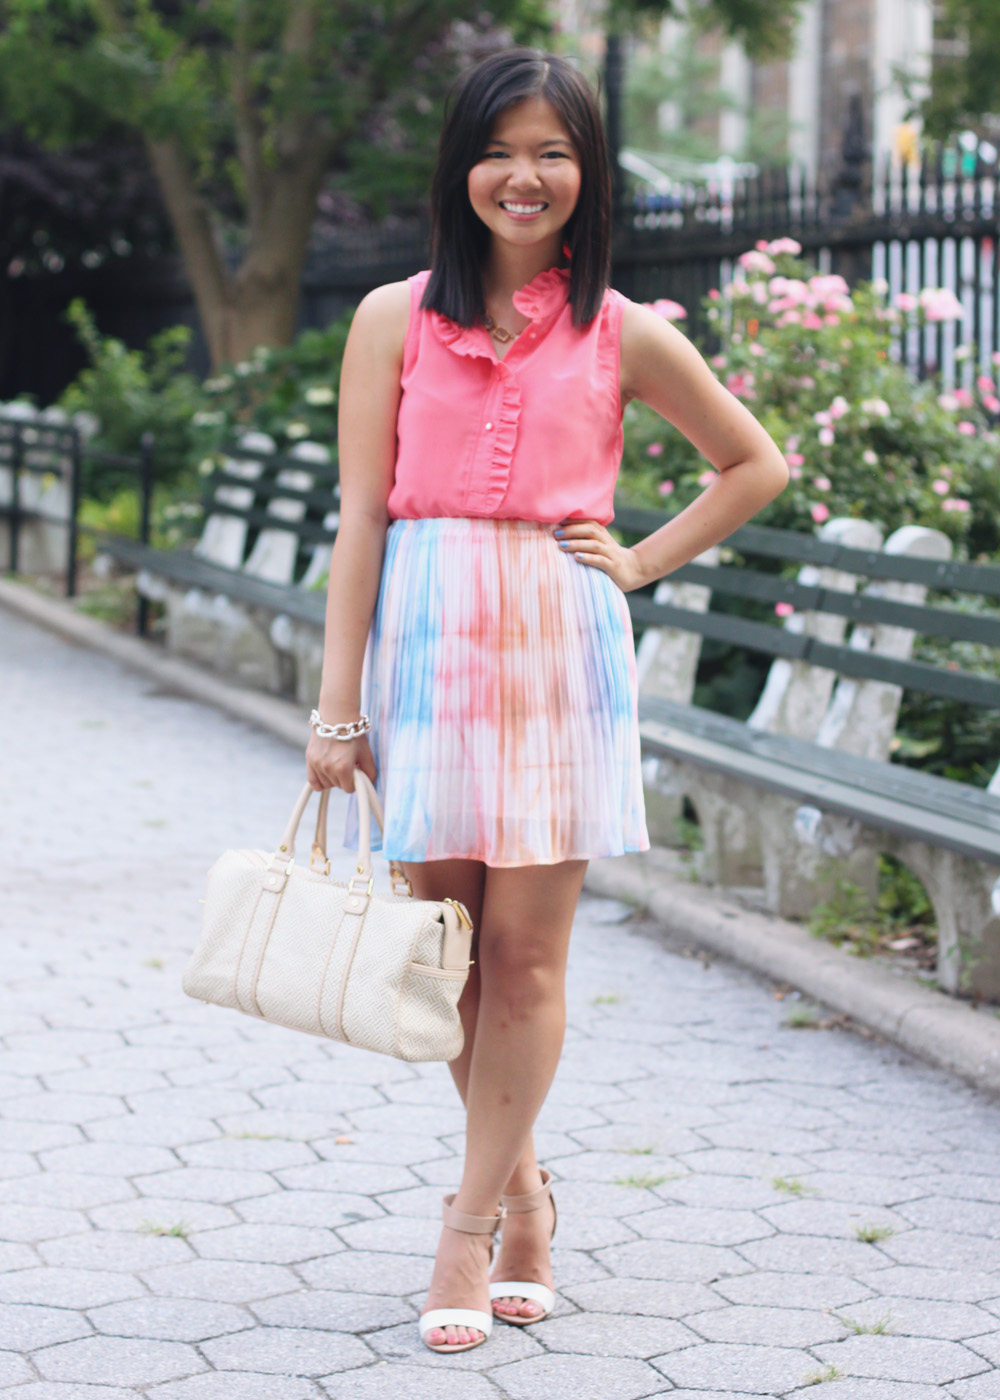 Skirt The Rules Blog; NYC fashion blogger; style blog; summer outfit photos; J.Crew Factory coral sleeveless blouse; Gentle Fawn Society pastel pleated skirt; Tory Burch straw summer satchel bag; C. Wonder crystal necklace; Derng rosegold pave link bracelet; Zara white nude colorblock heels